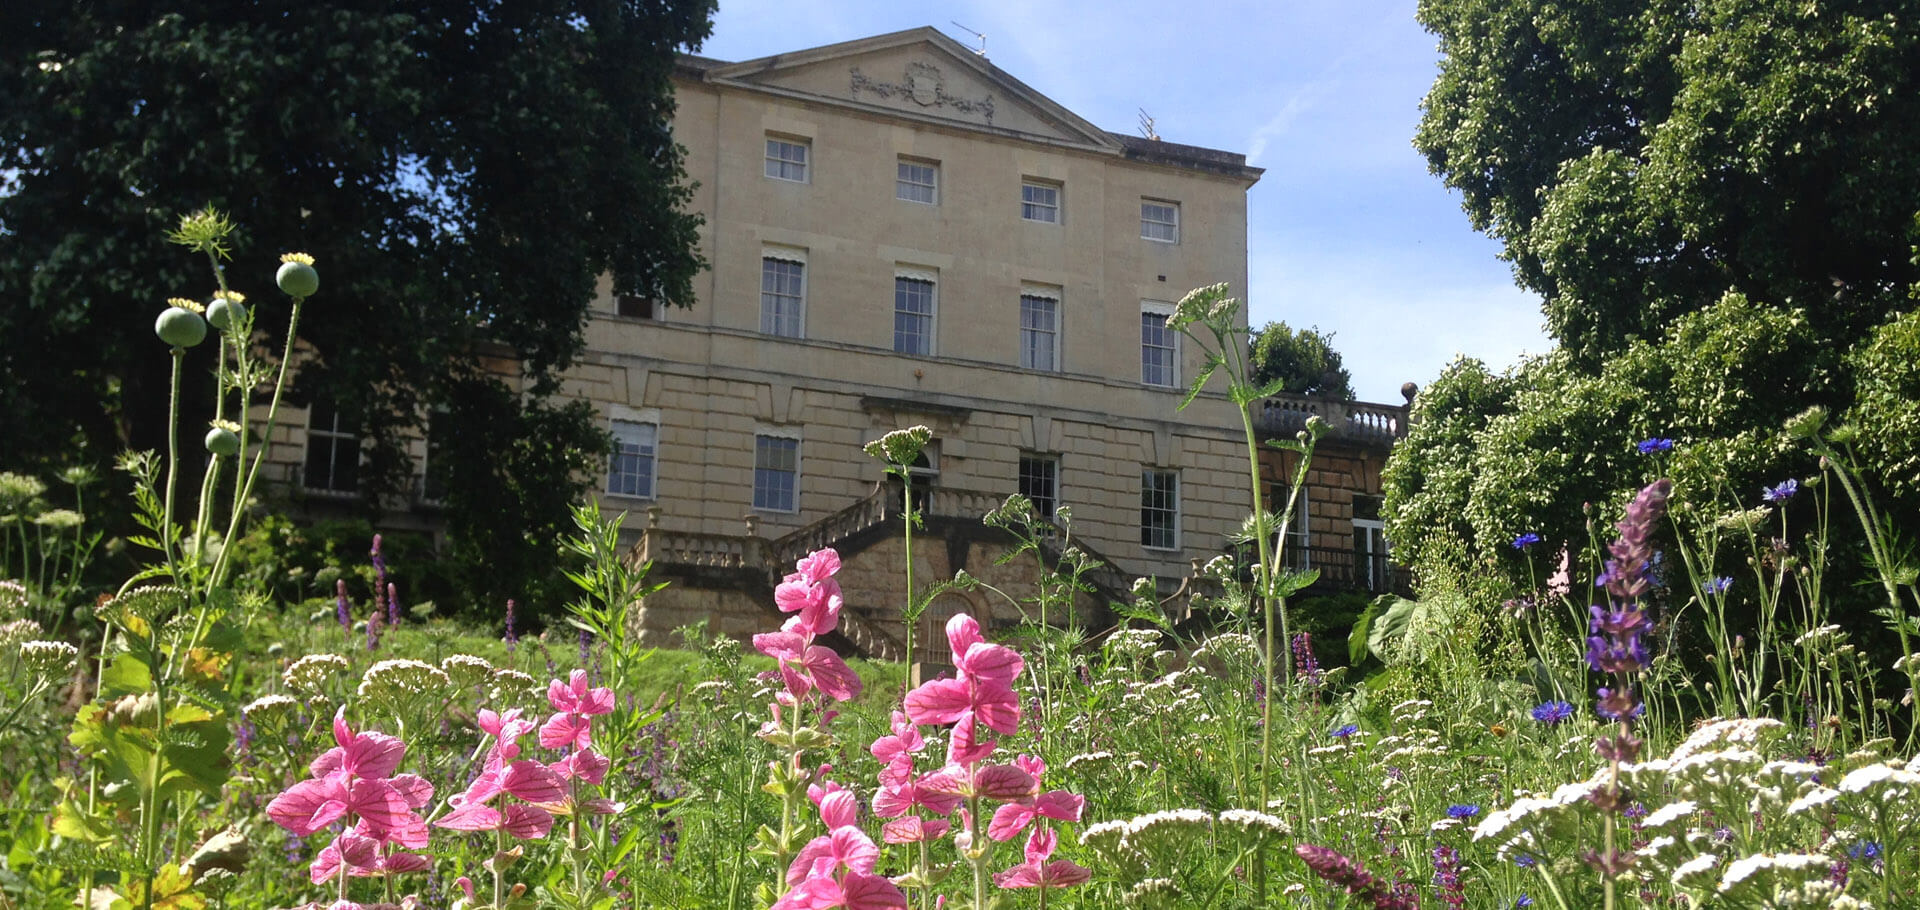 A Heritage Lottery funded restoration in Bristol